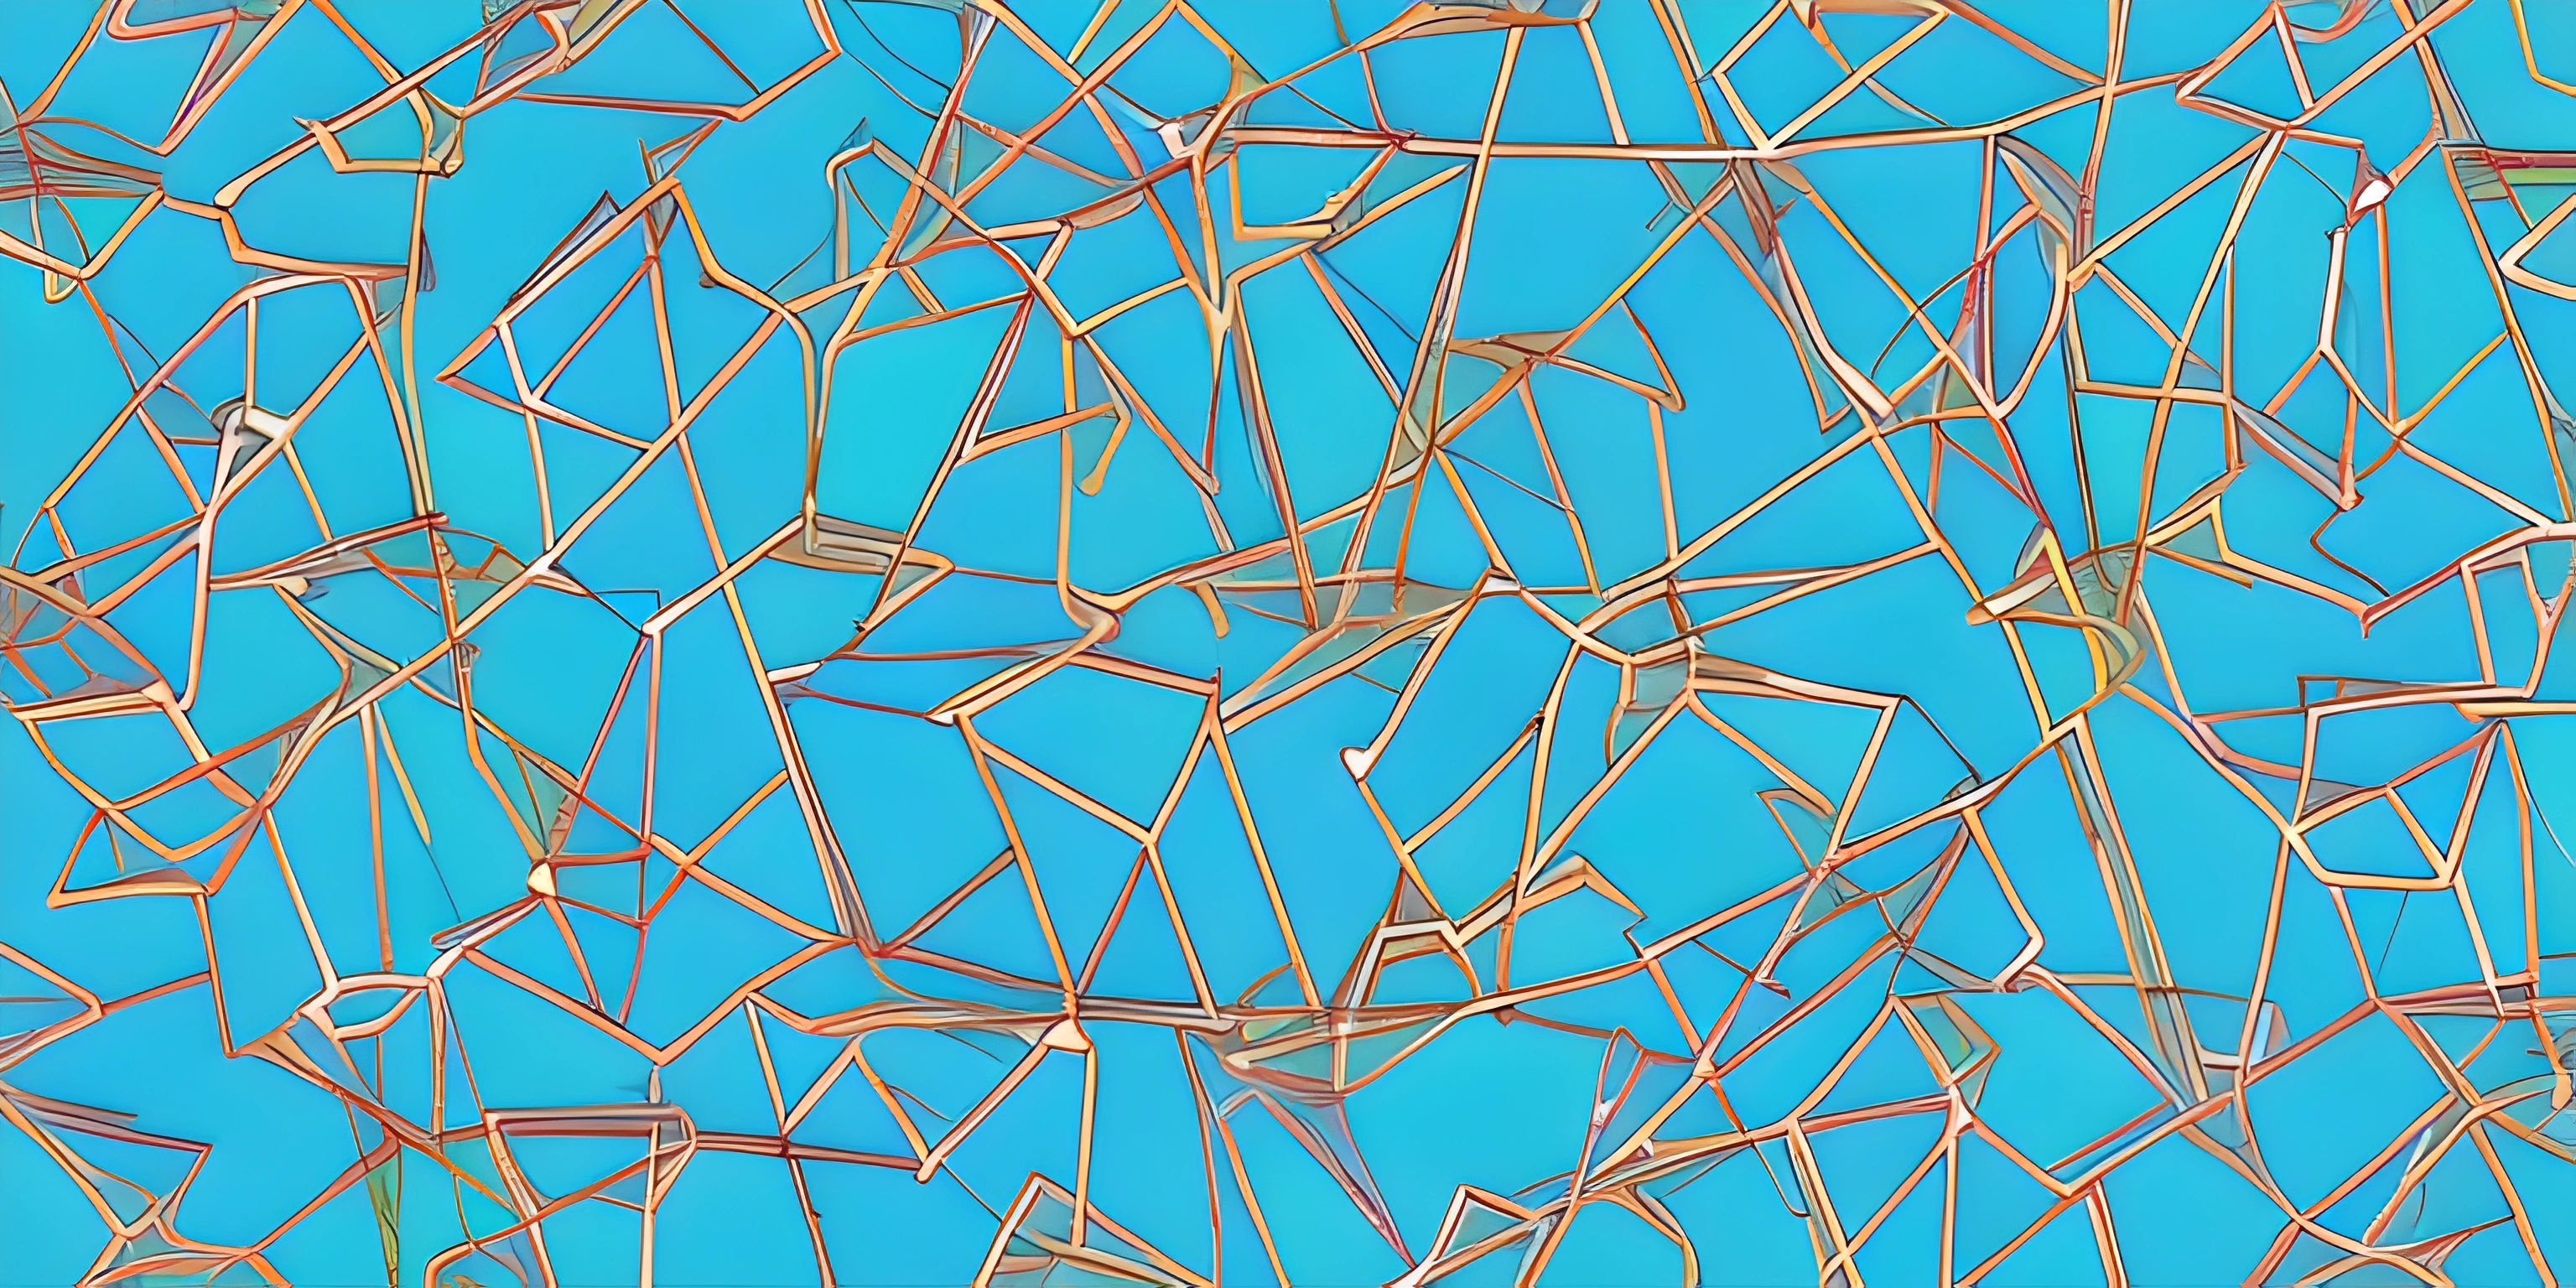 a bunch of pieces of metal on a table on a blue background surface with multiple lines